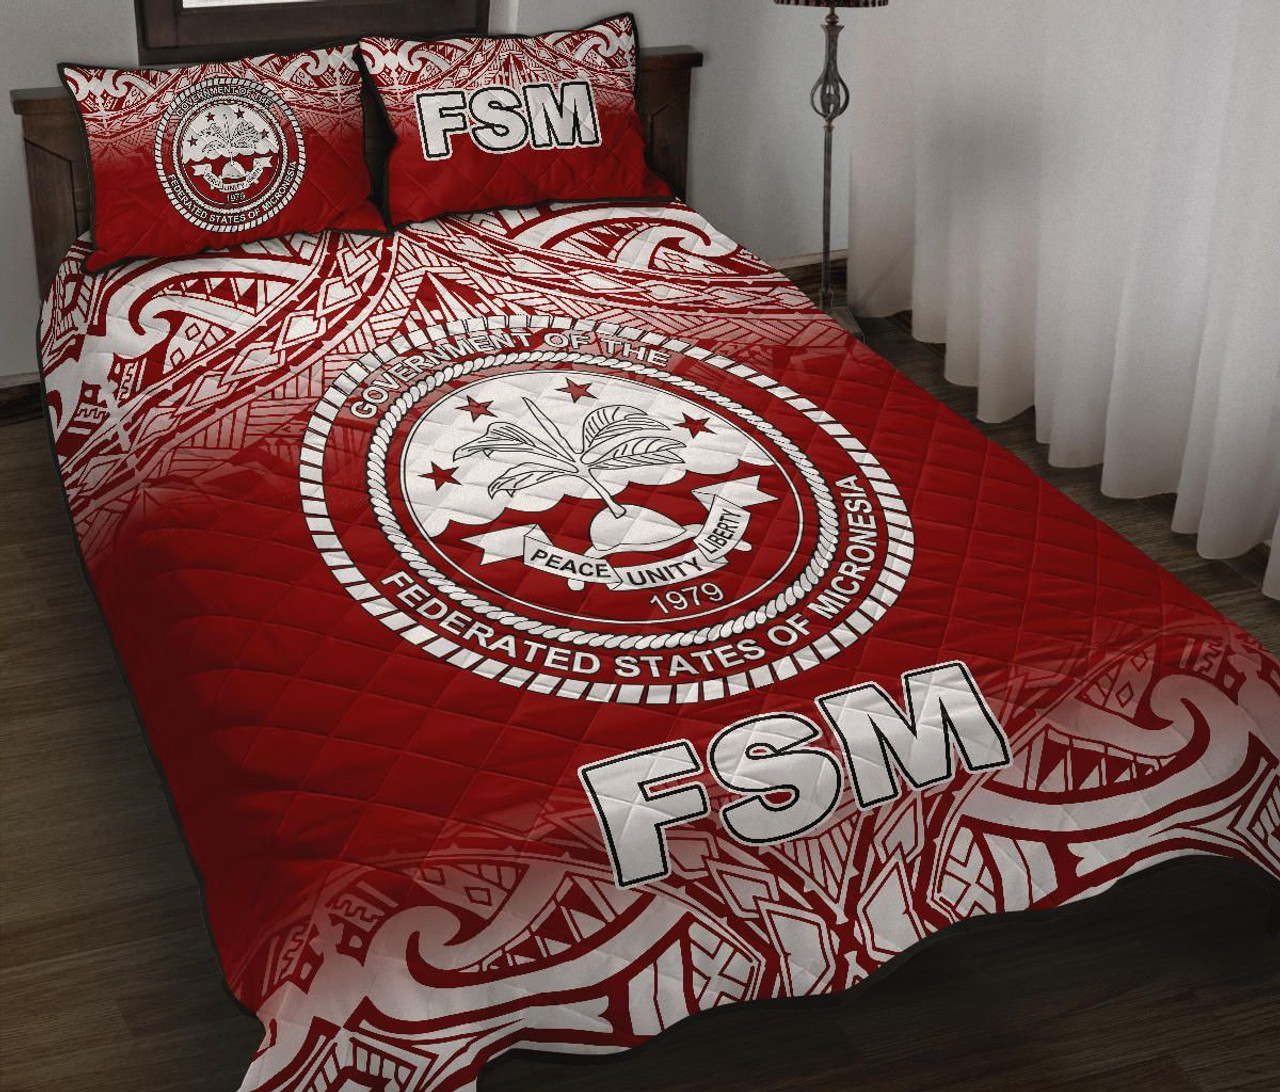 Federated States of Micronesia Quilt Bed Set - Federated States of Micronesia Seal Red Fog Style 2